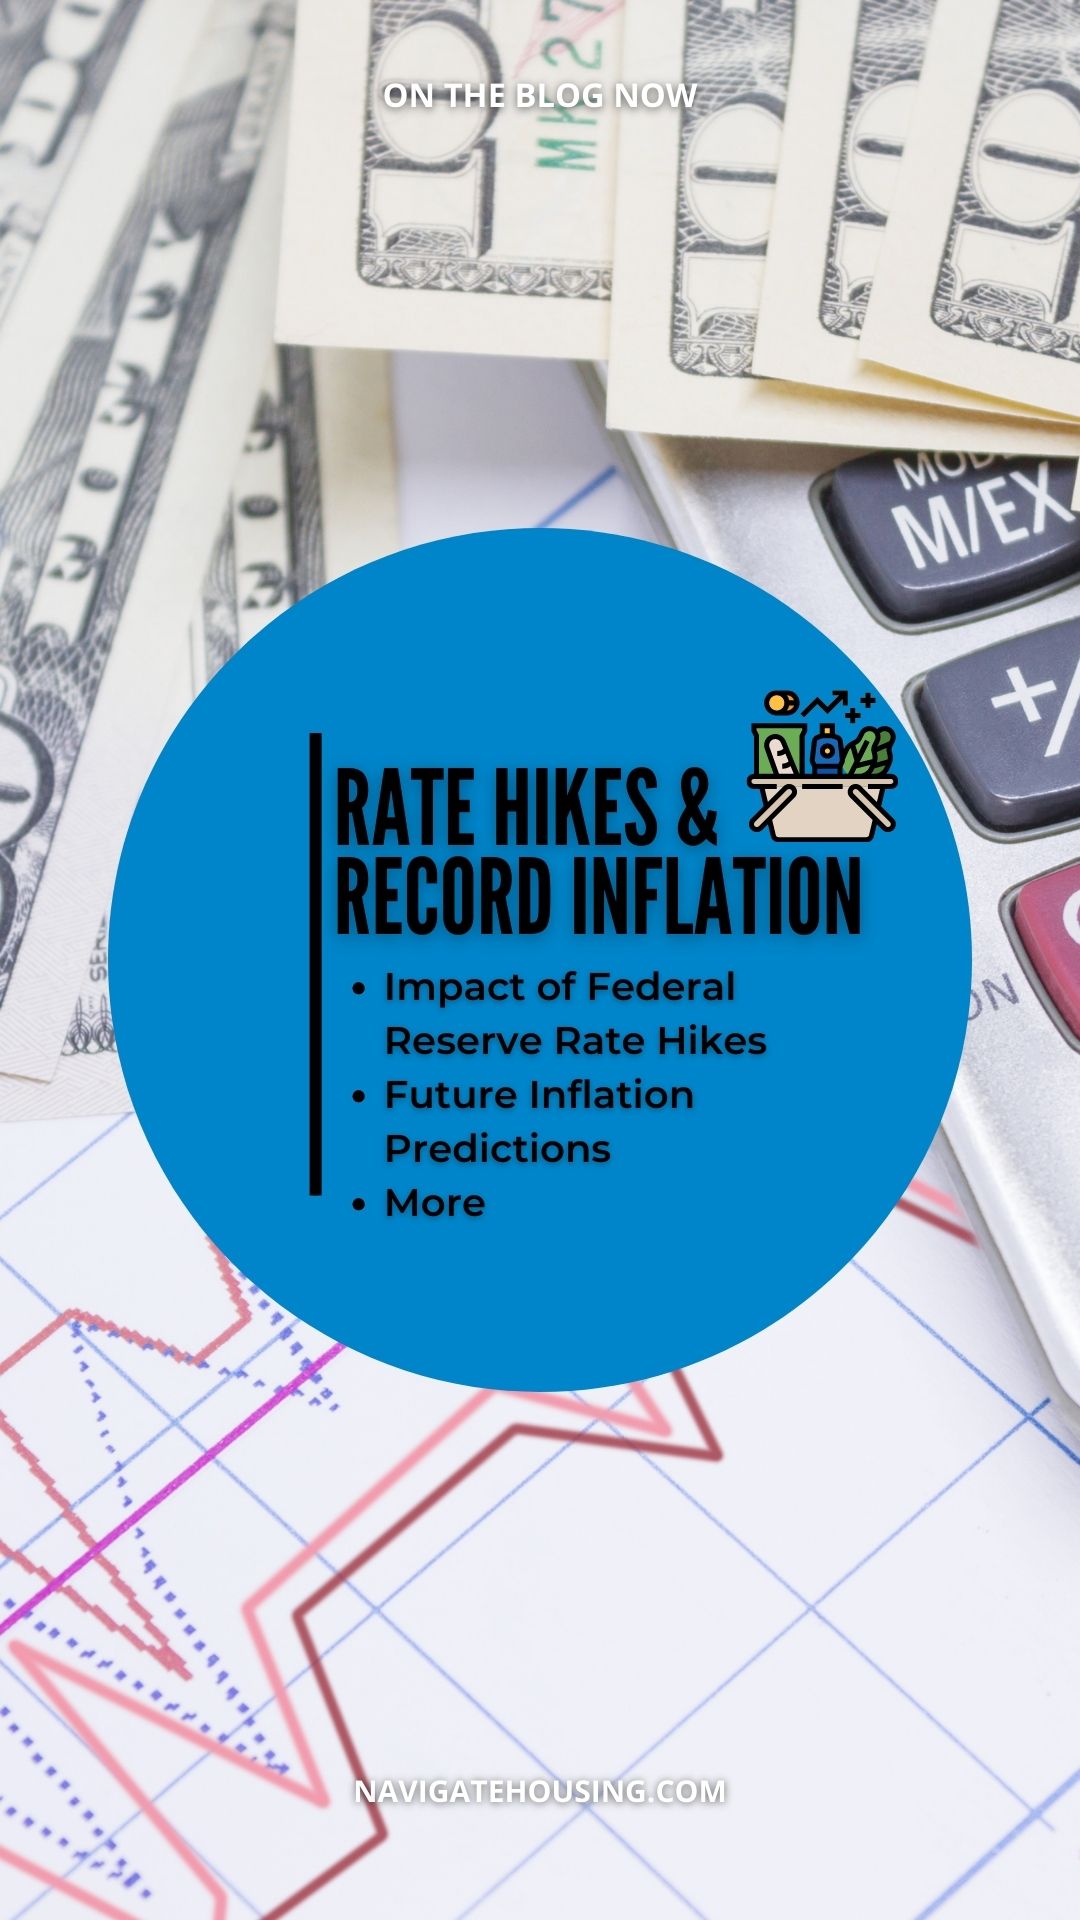 Rate Hikes & Record Inflation